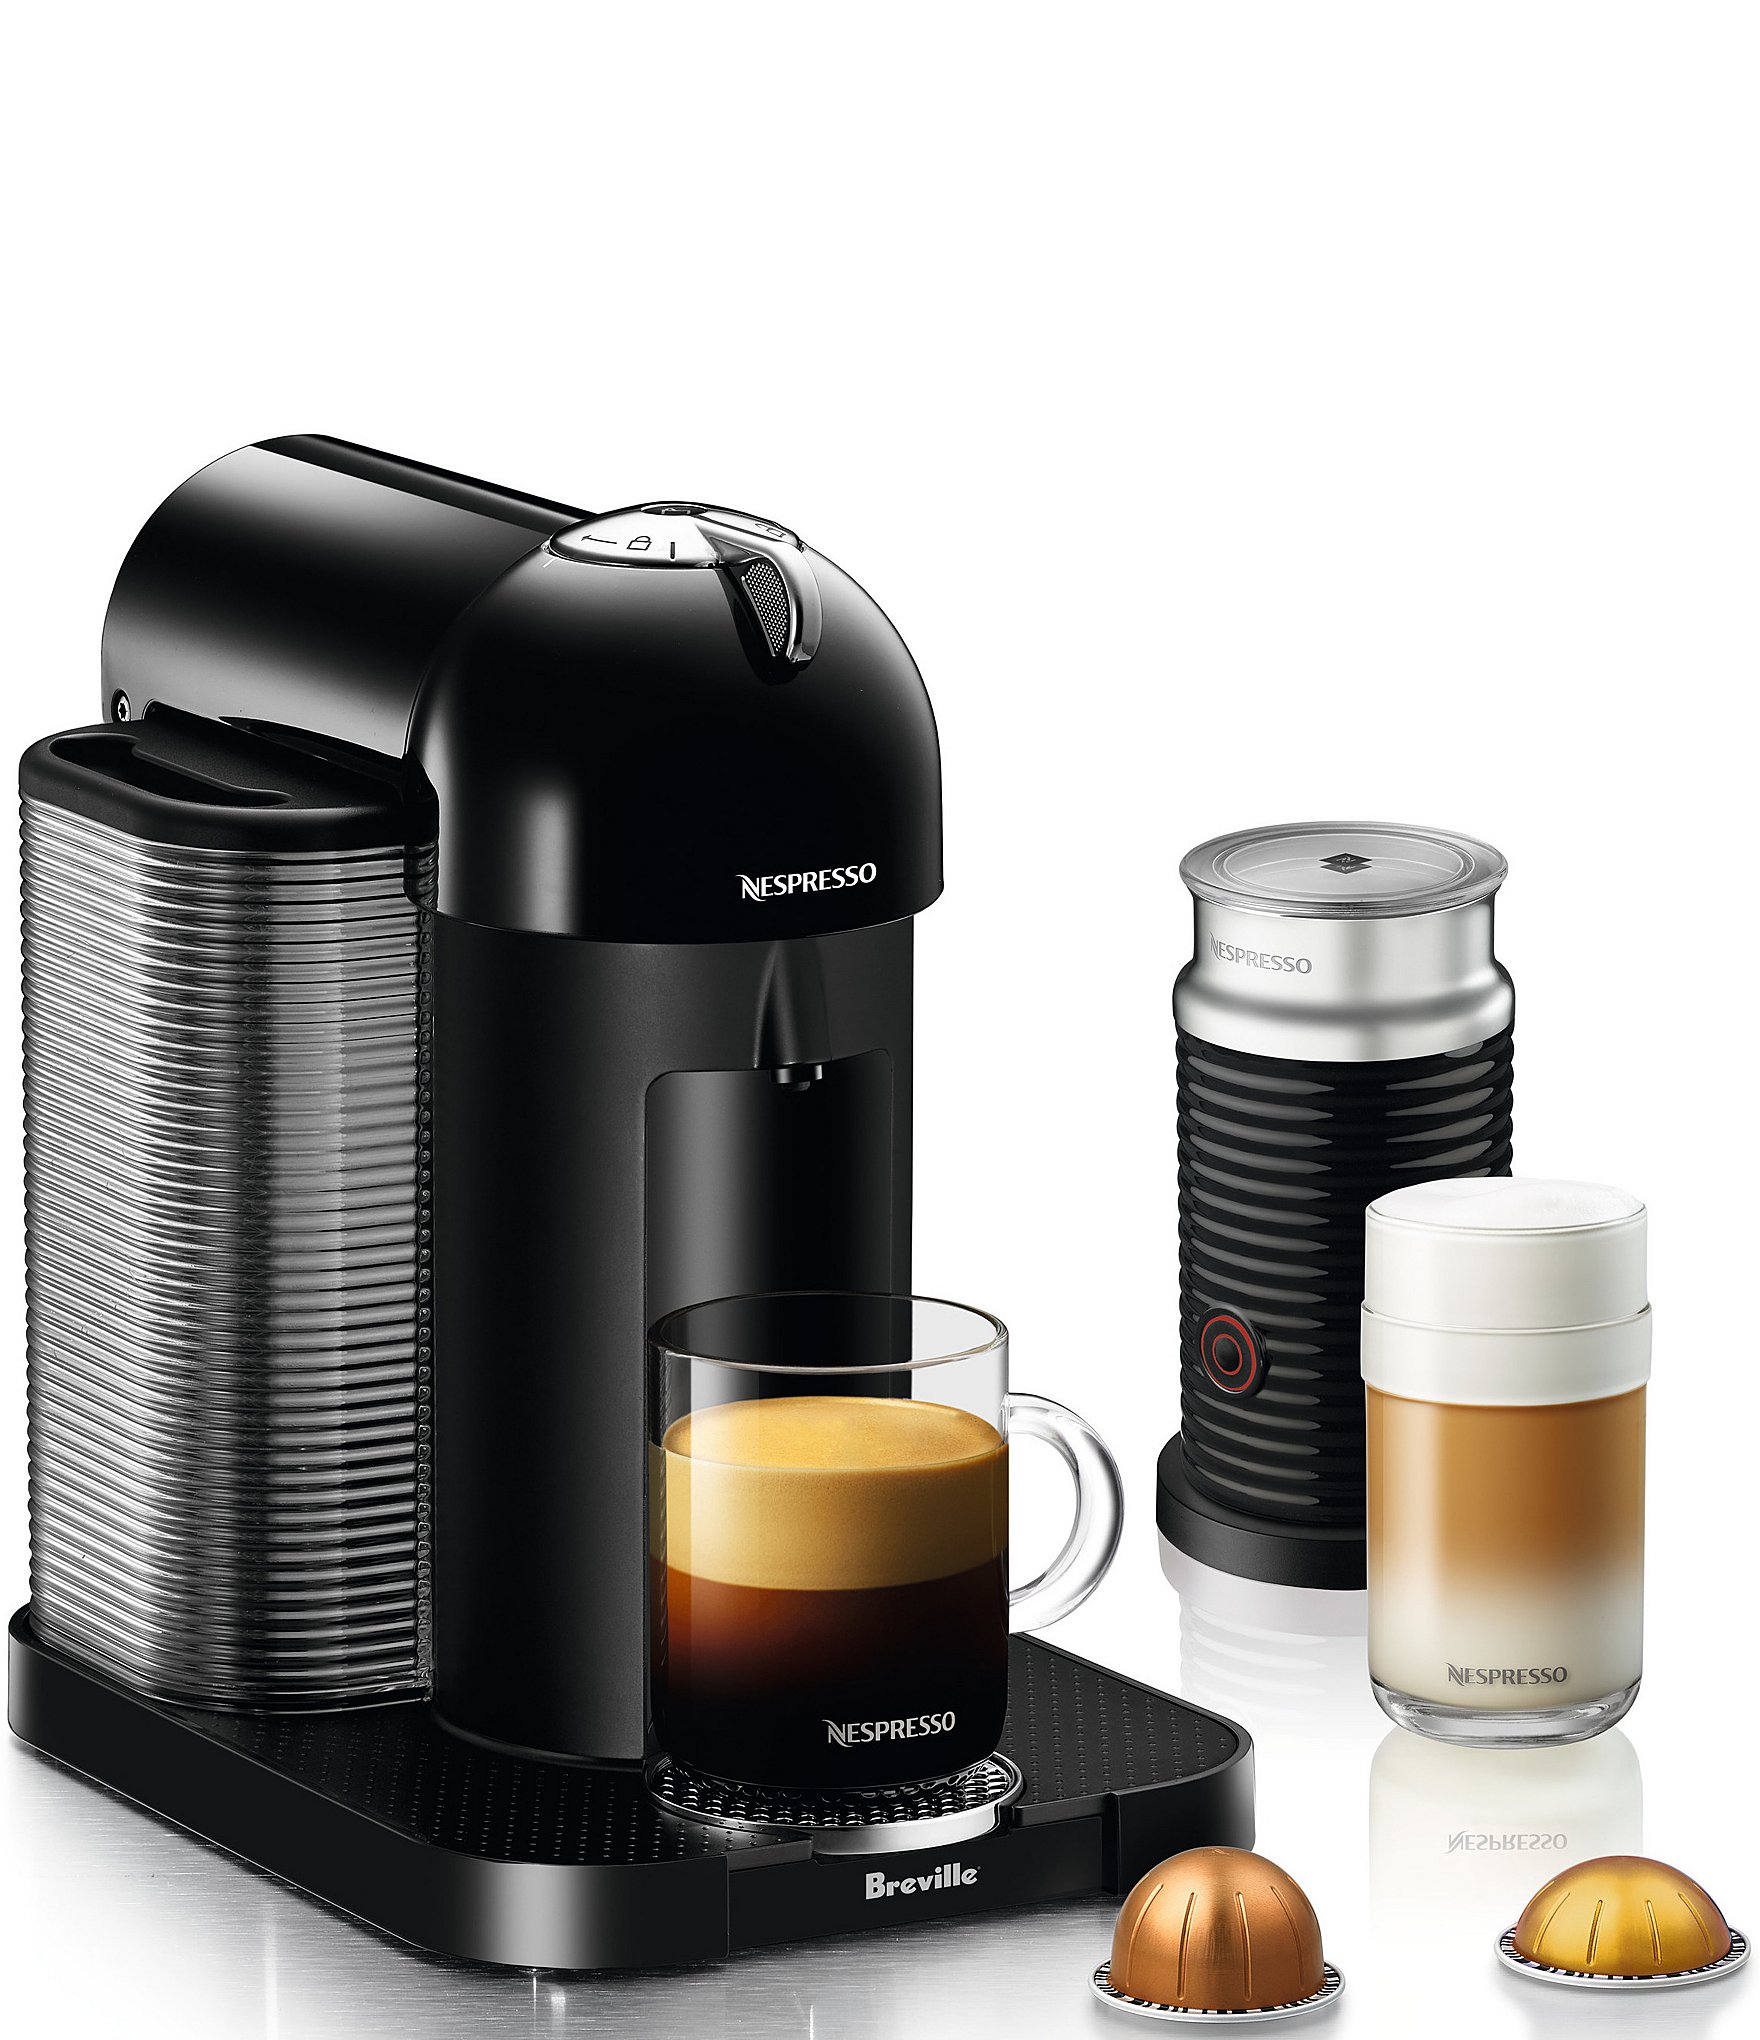 Nespresso Vertuo Next with Milk Frother, Coffee and Voucher - 20864656